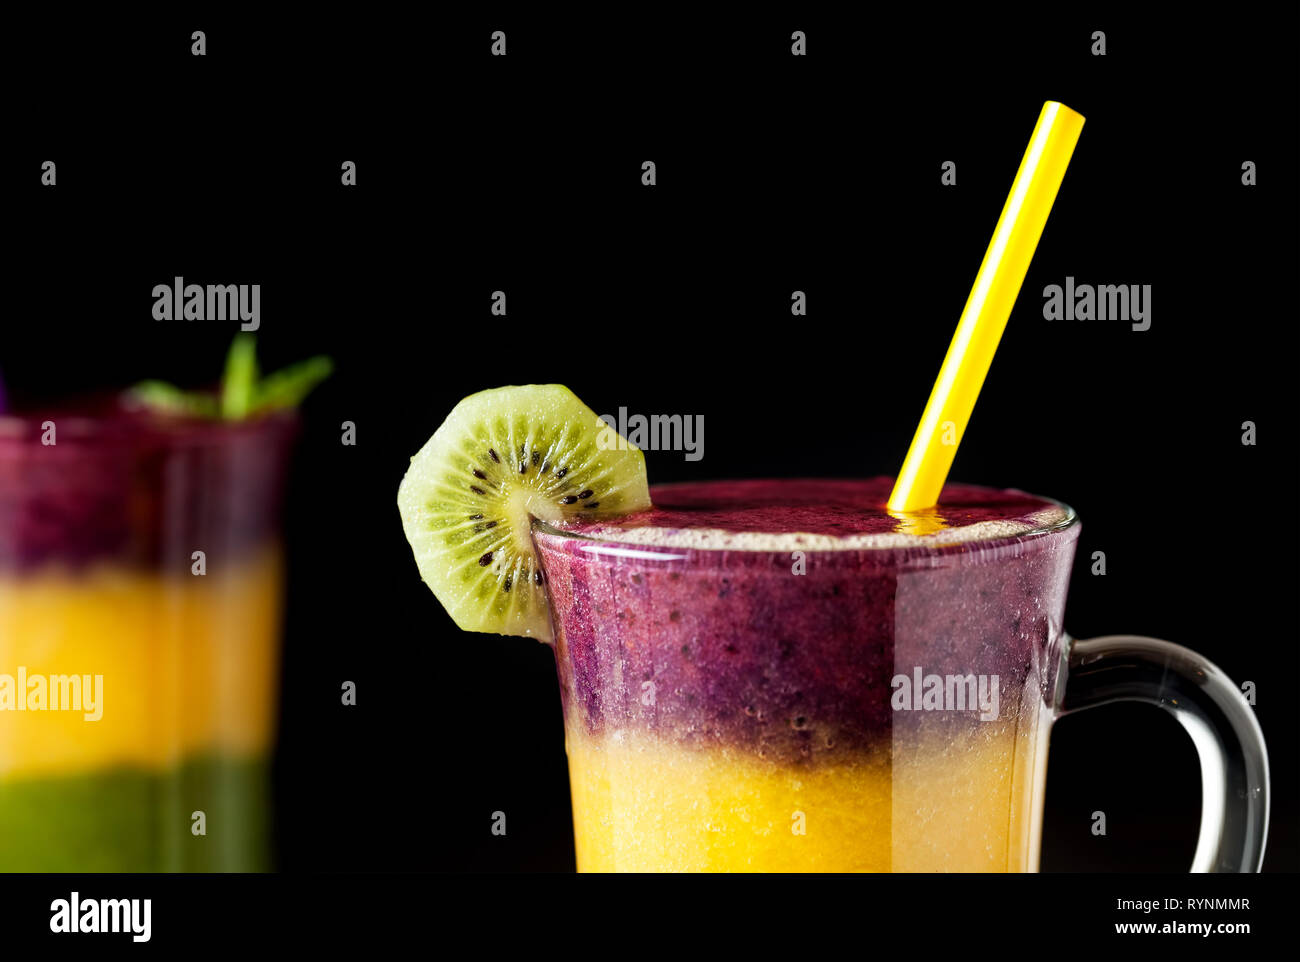 Two glass of smoothie with colorful layers from kiwi, oranges and blackberry on black background close up Stock Photo